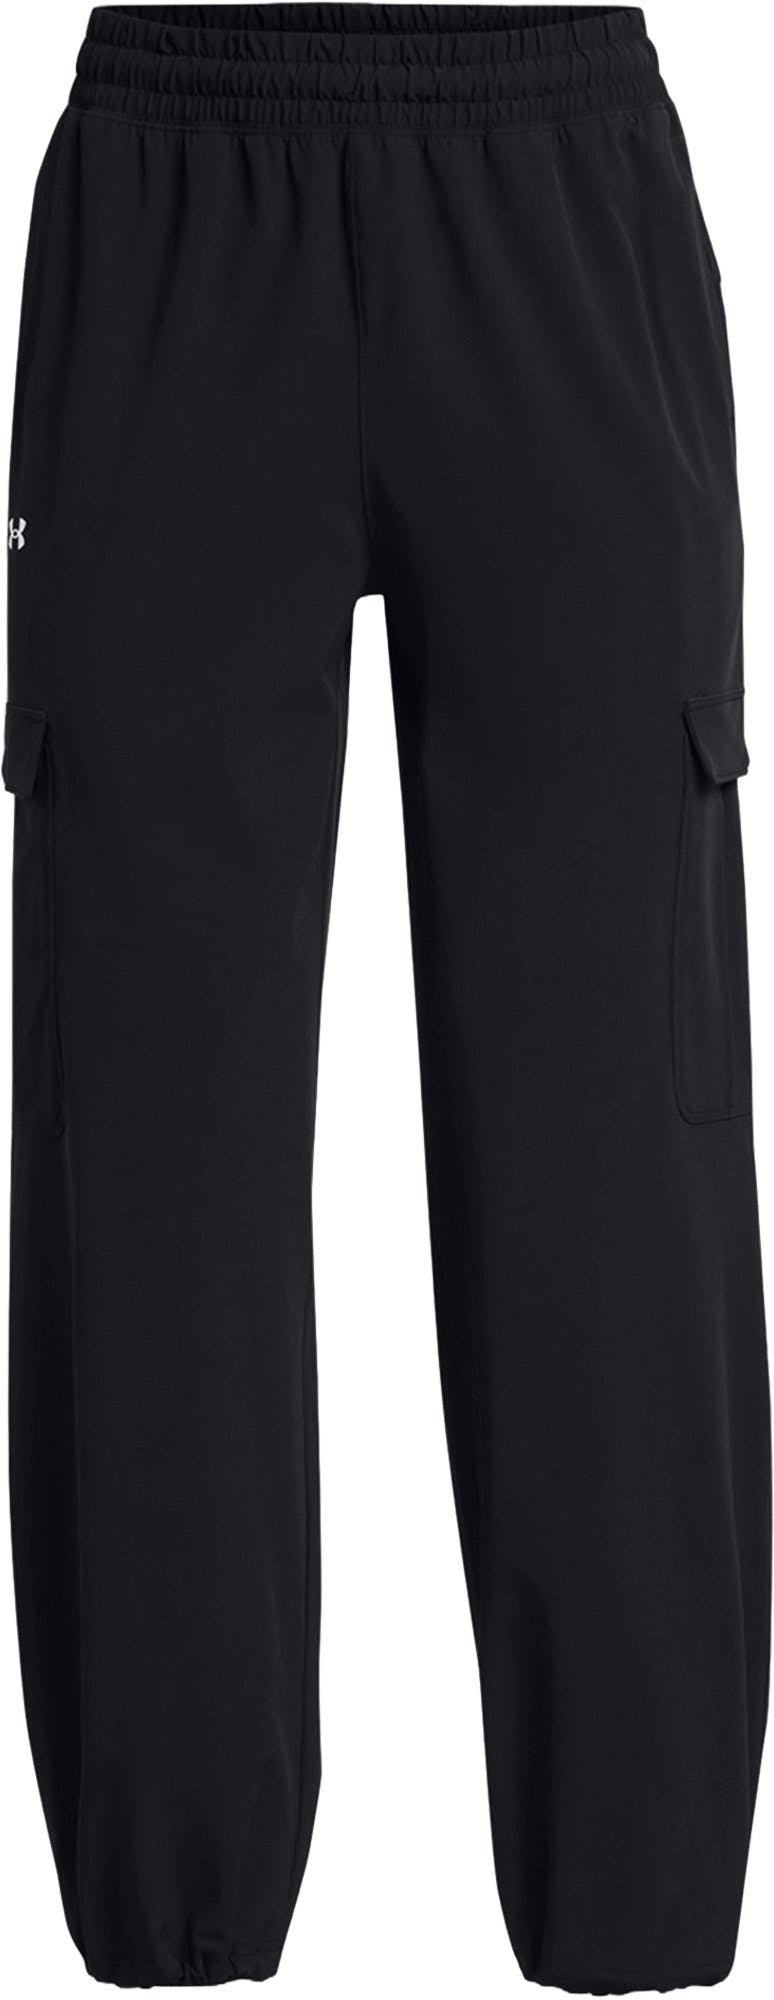 Product image for UA ArmourSport Woven Cargo Pants - Women's